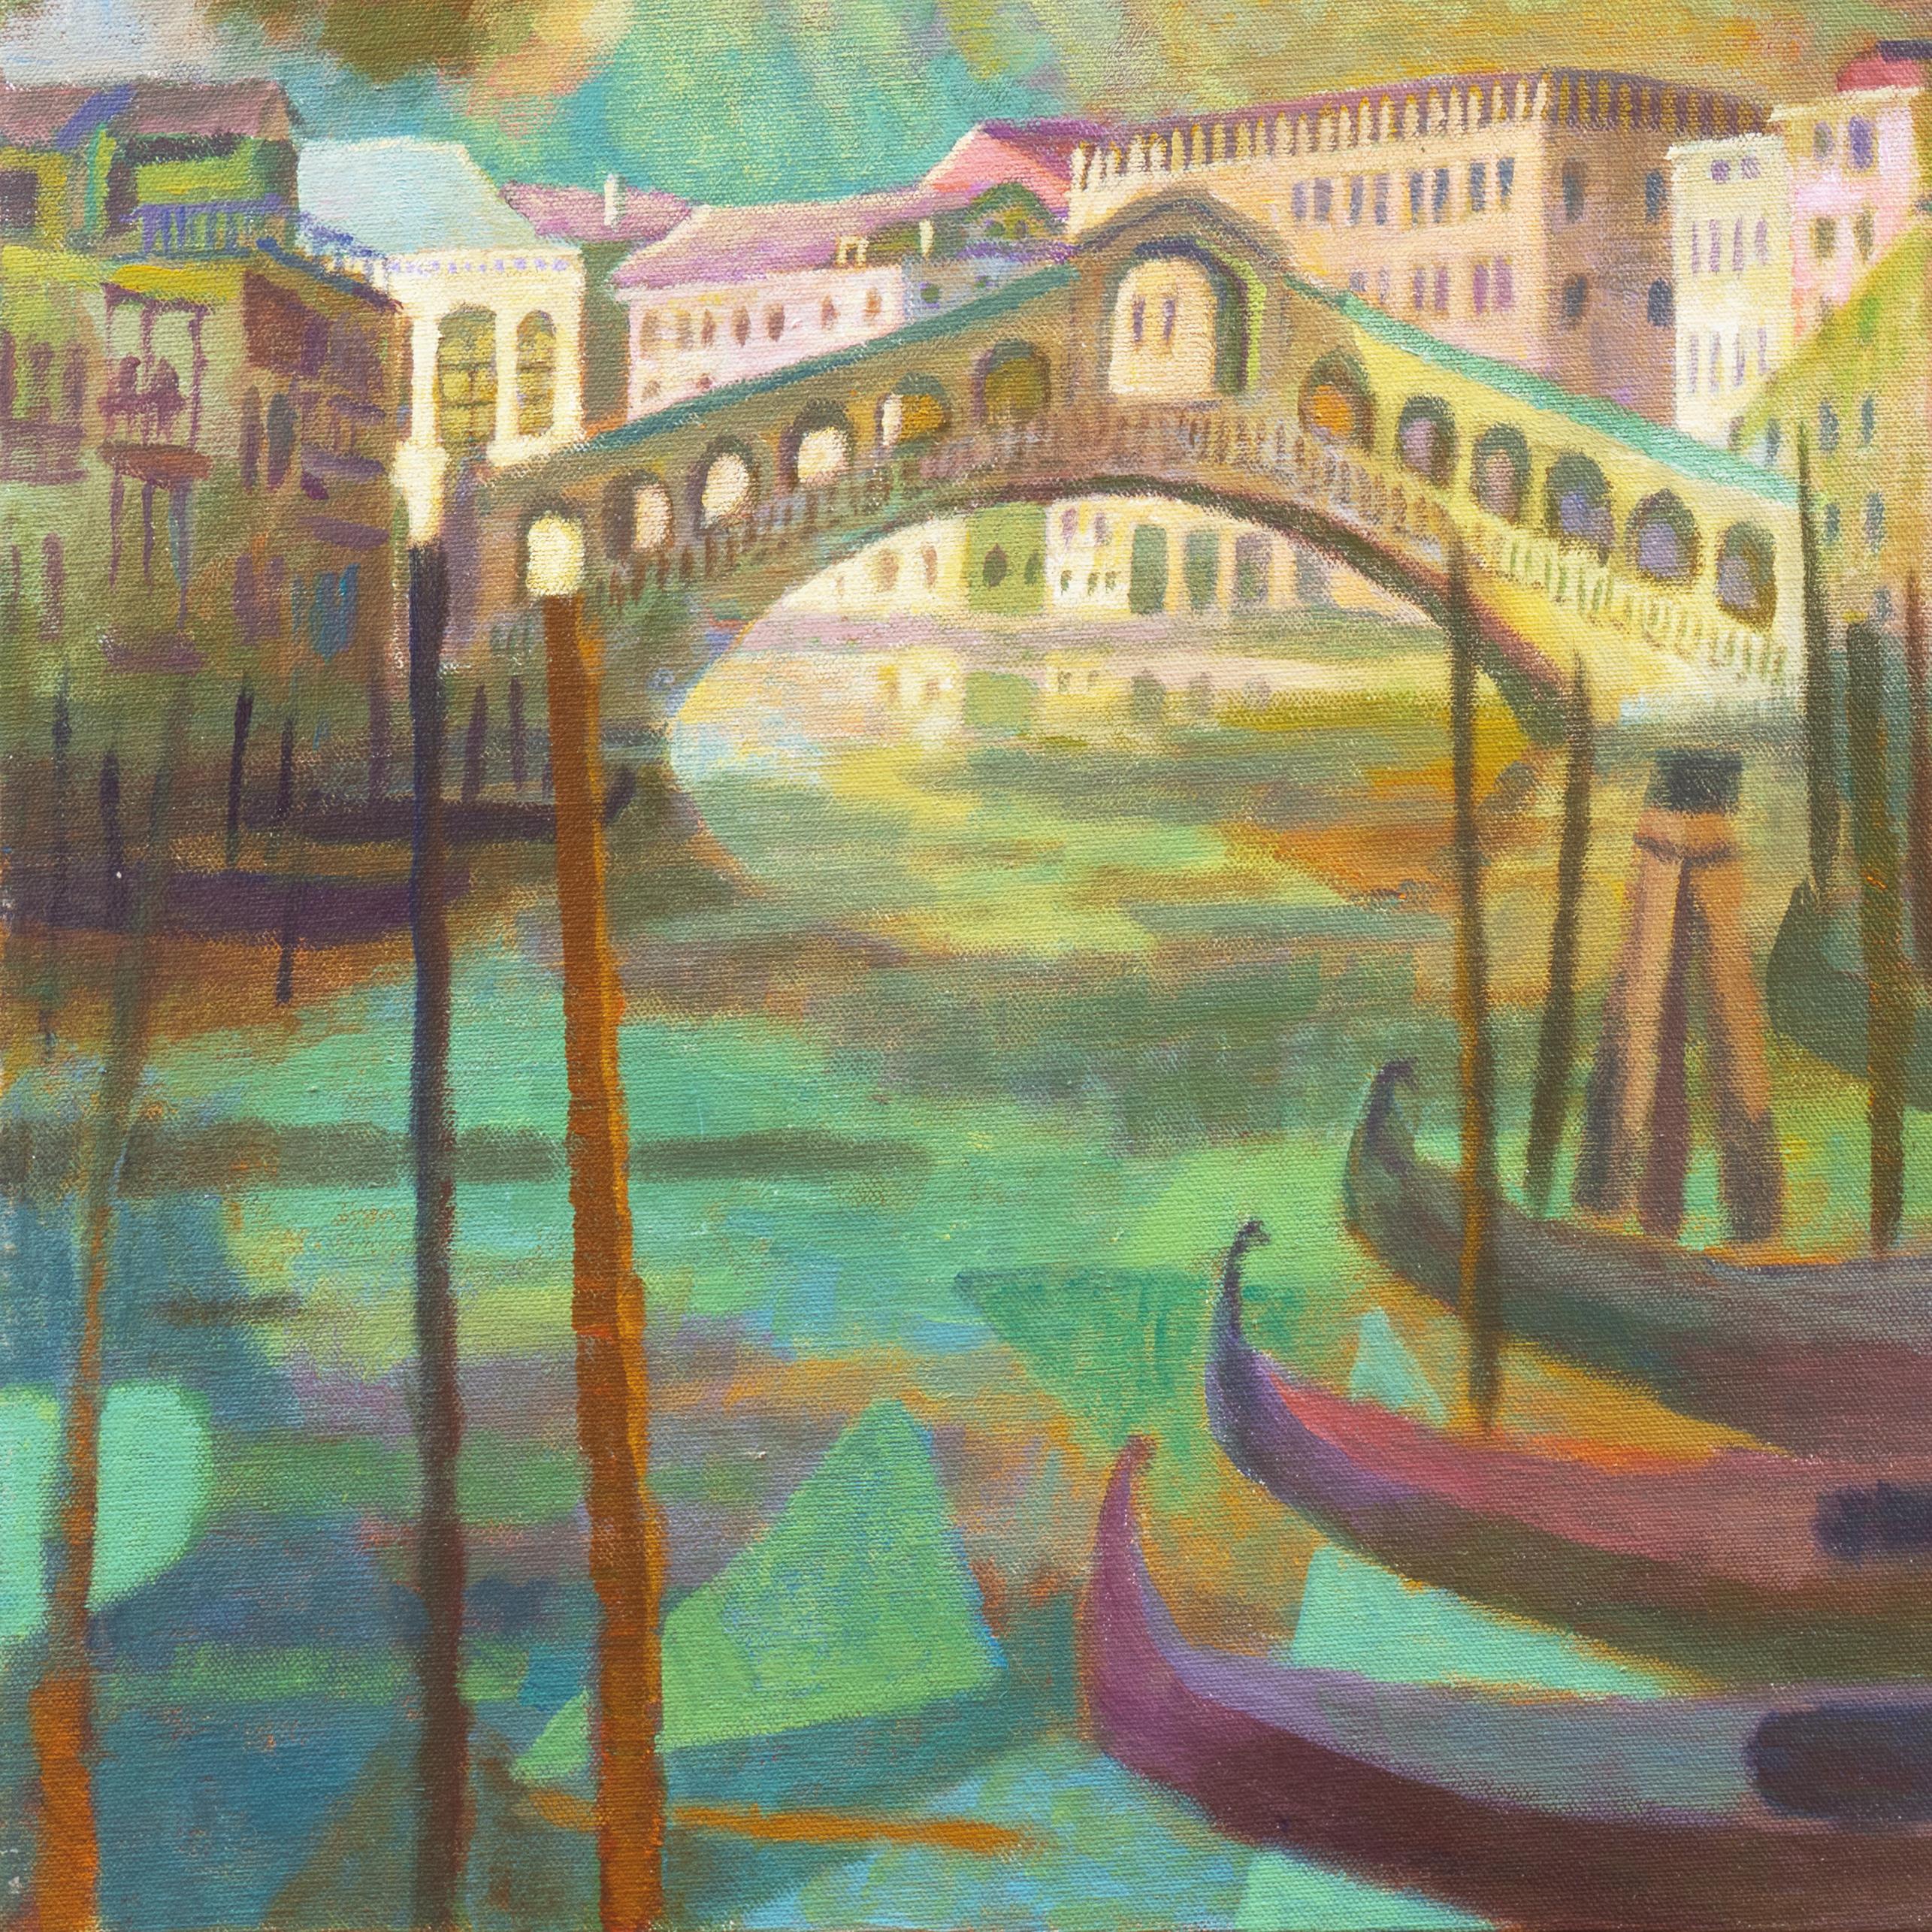 Signed lower right, 'K. Gasser' for Karl Gasser (Italian, 1948-2017) and dated 2011.

A vibrant, Futurist-derived view of Venice's Grand Canal with a row of gondolas in the foreground and a view beyond to the Rialto Bridge under the refracted rays